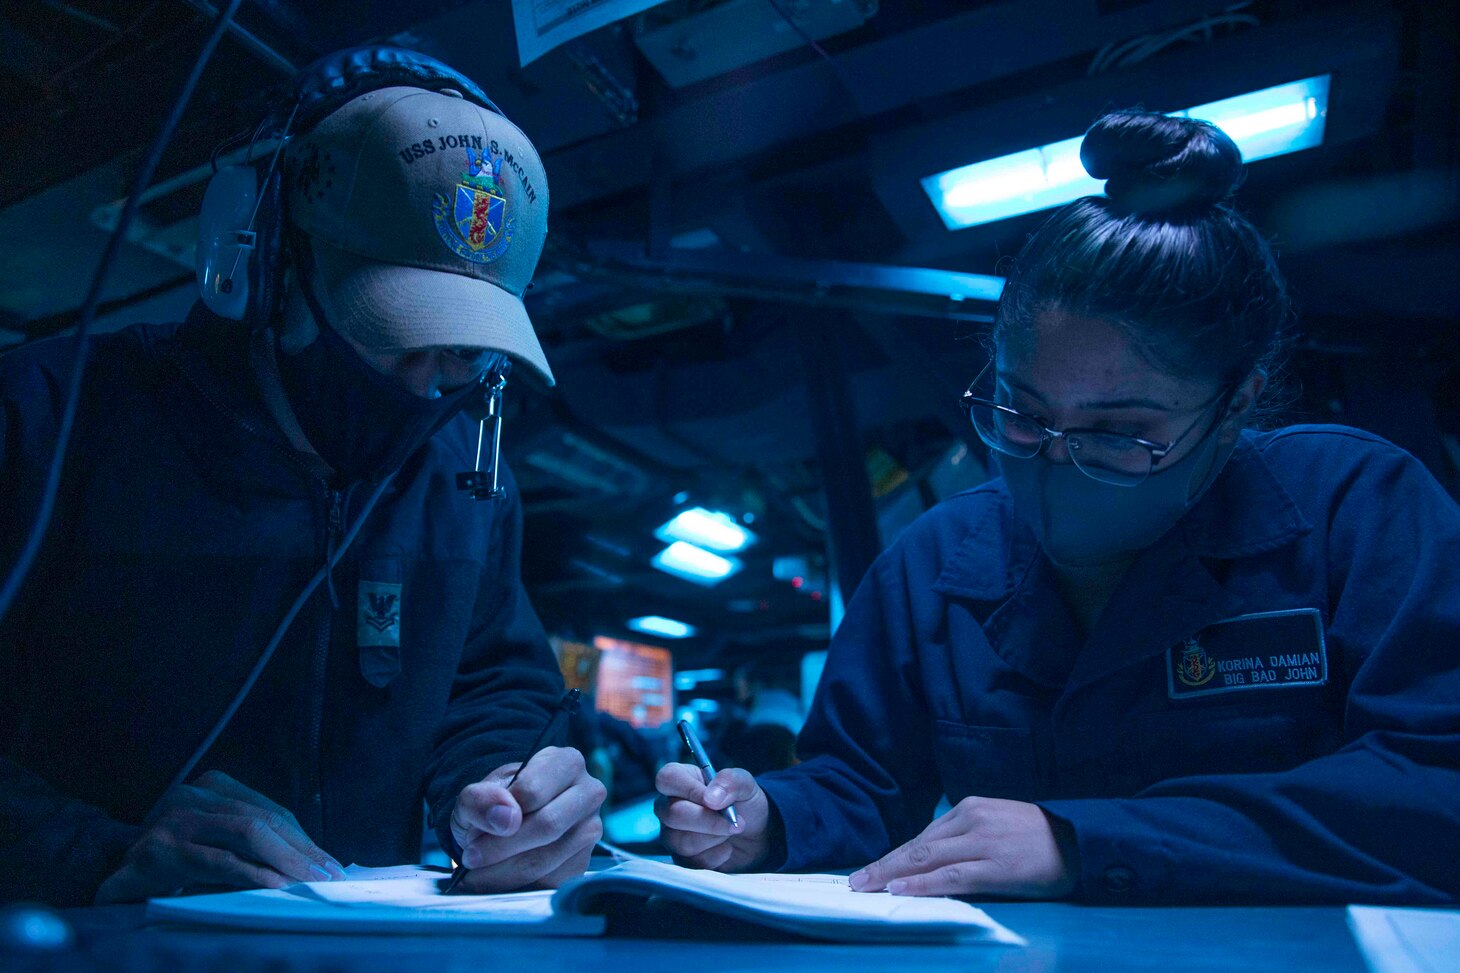 210407-N-HI376-1004 SOUTH CHINA SEA (April 7, 2021) Operations Specialist 2nd Class Tyler Manning, from Orlando, Fla., and Operations Specialist Seaman Korina Damian, from Lake Havasu, Ariz., stand watch in the combat information center as the Arleigh Burke-class guided-missile destroyer USS John S. McCain (DDG 56) conducts routine underway operations. John S. McCain is forward-deployed to the U.S. 7th Fleet area of operations in support of a free and open Indo-Pacific. (U.S. Navy photo by Mass Communication Specialist 1st Class Jeremy Graham)